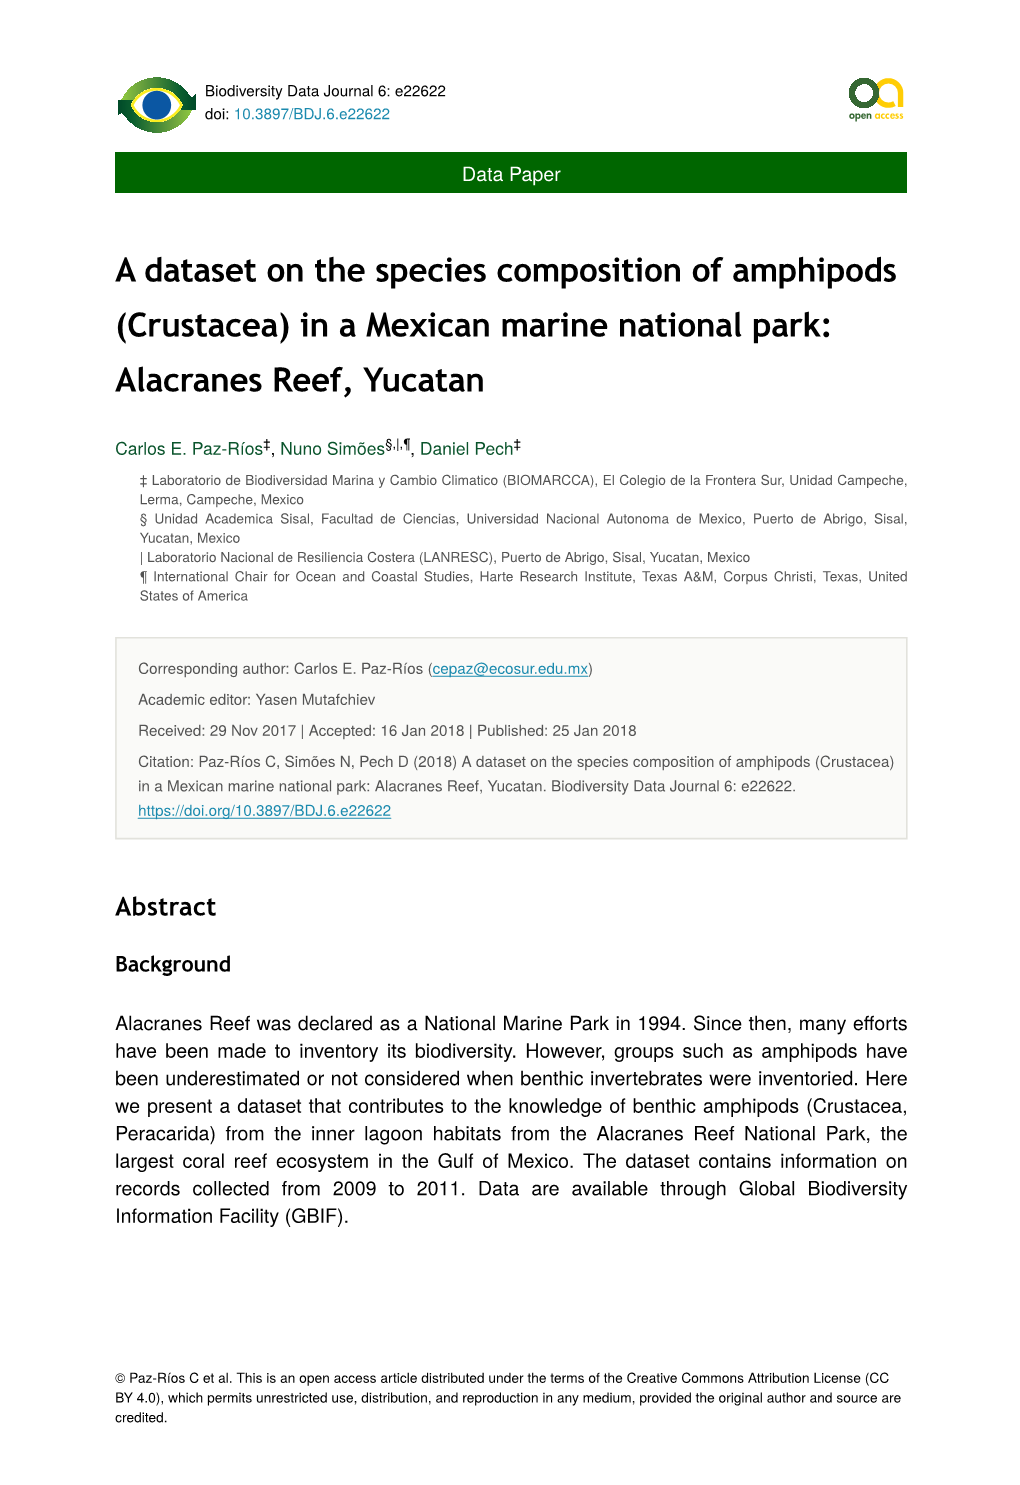 A Dataset on the Species Composition of Amphipods (Crustacea) in a Mexican Marine National Park: Alacranes Reef, Yucatan